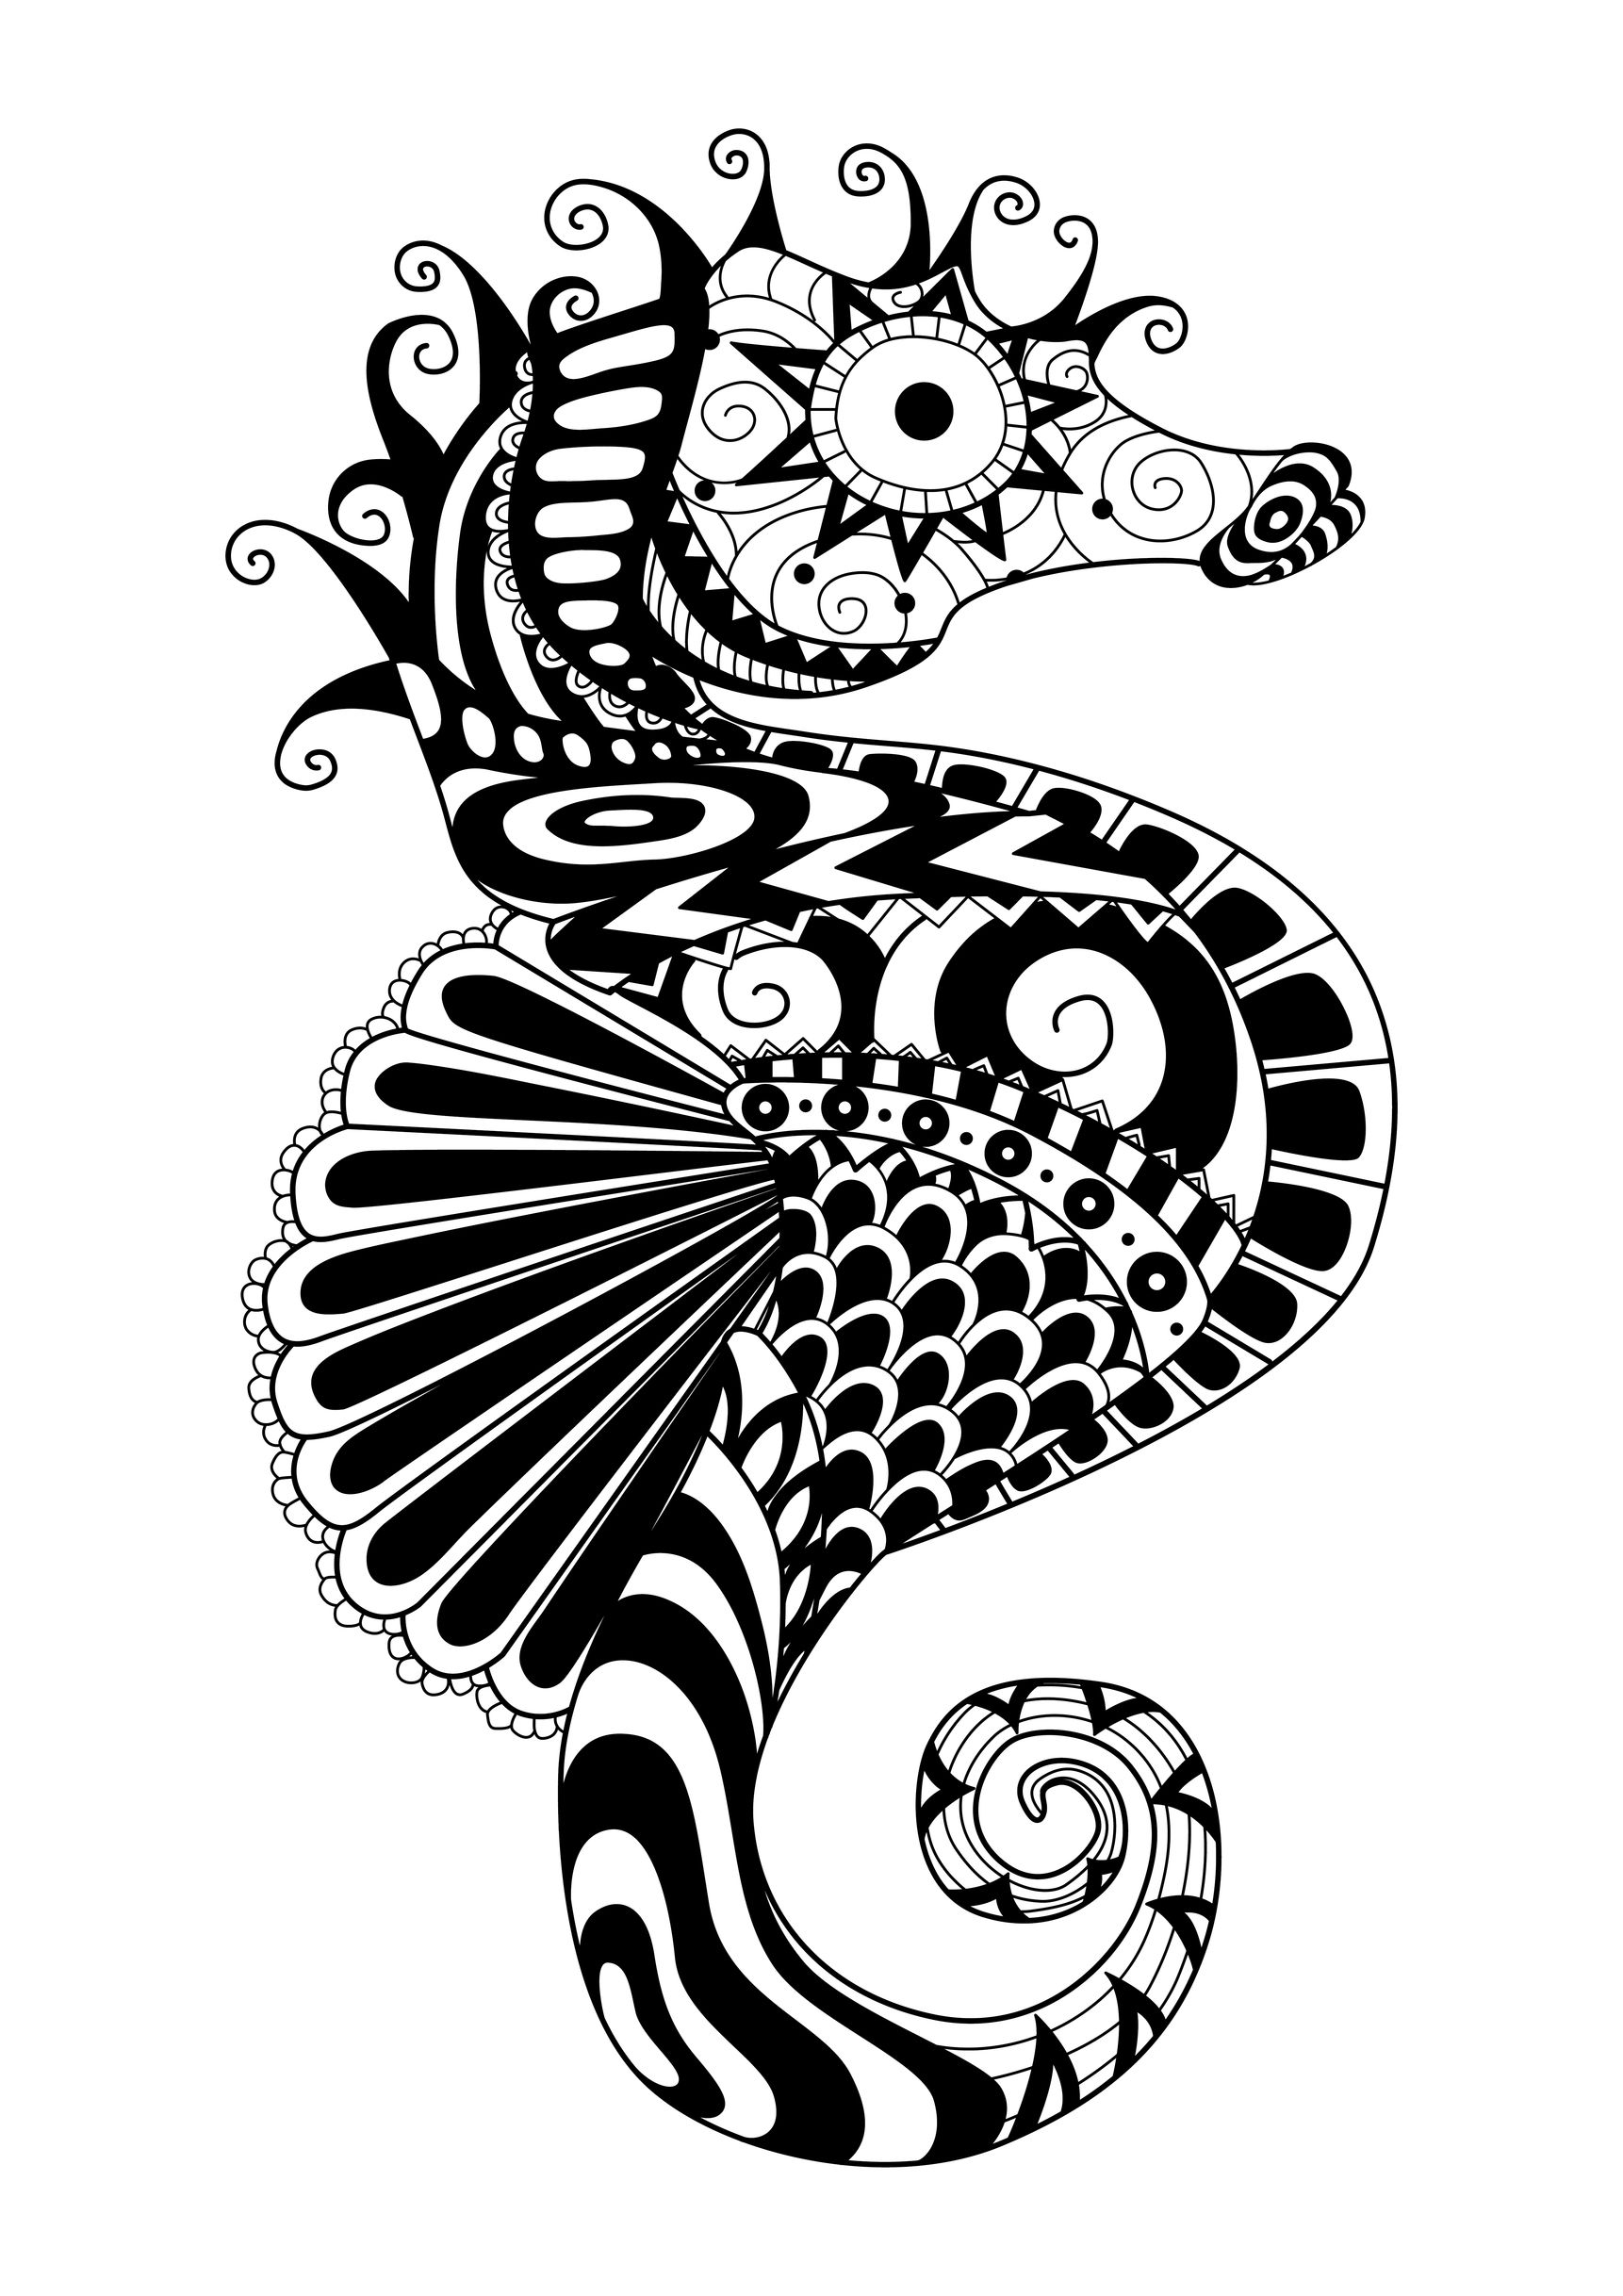 Zentangle sea horse - Water worlds Adult Coloring Pages